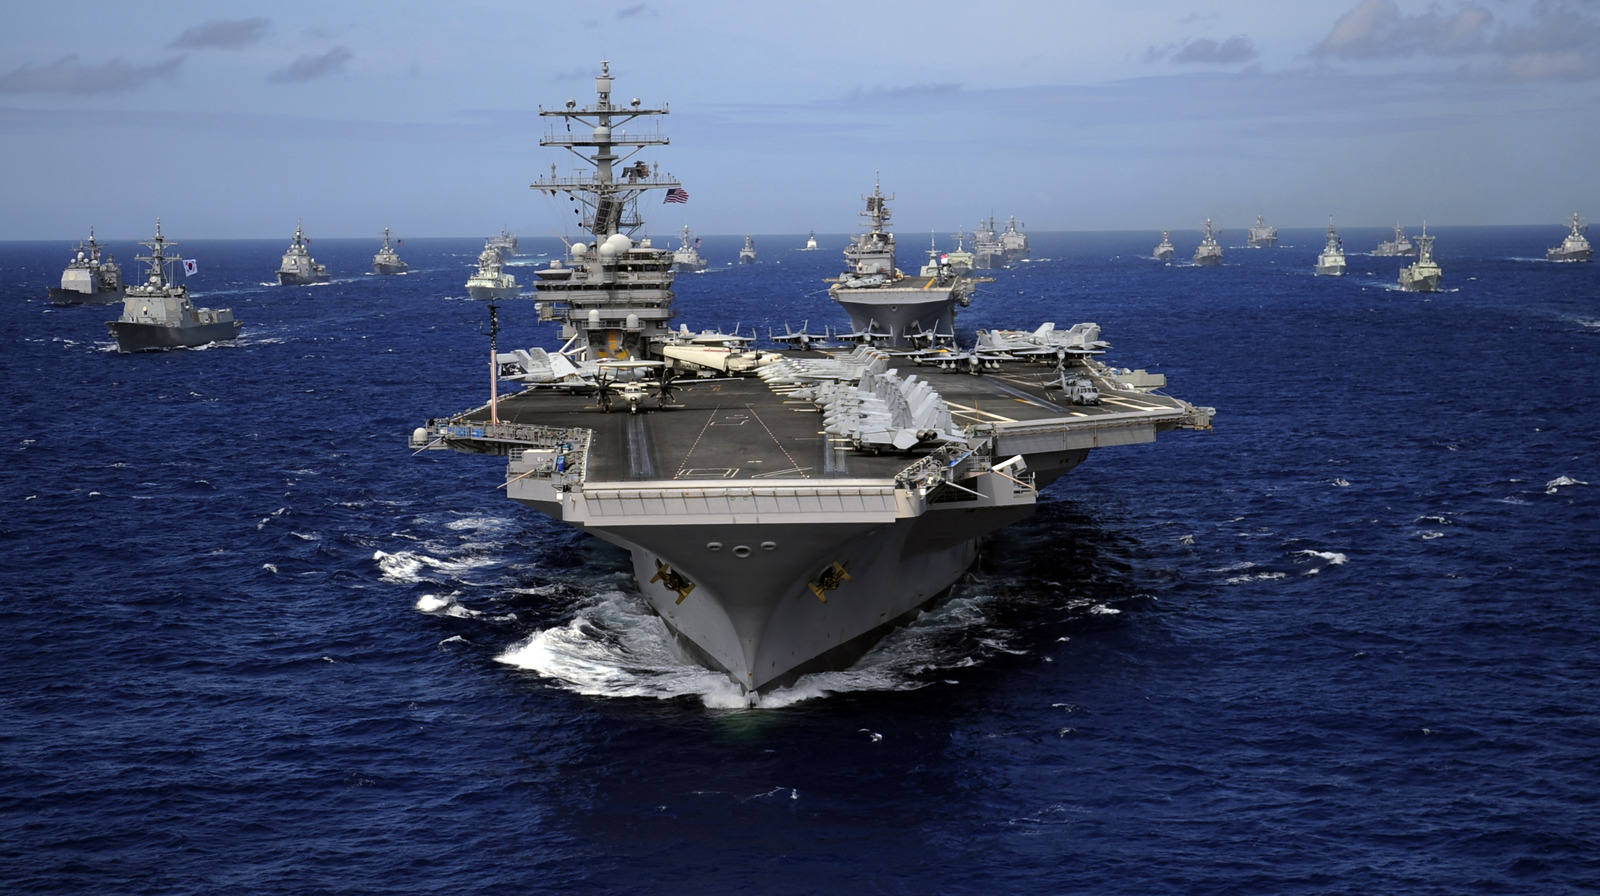 How many ships belong to a carrier strike group (CSG) and which ones are they?